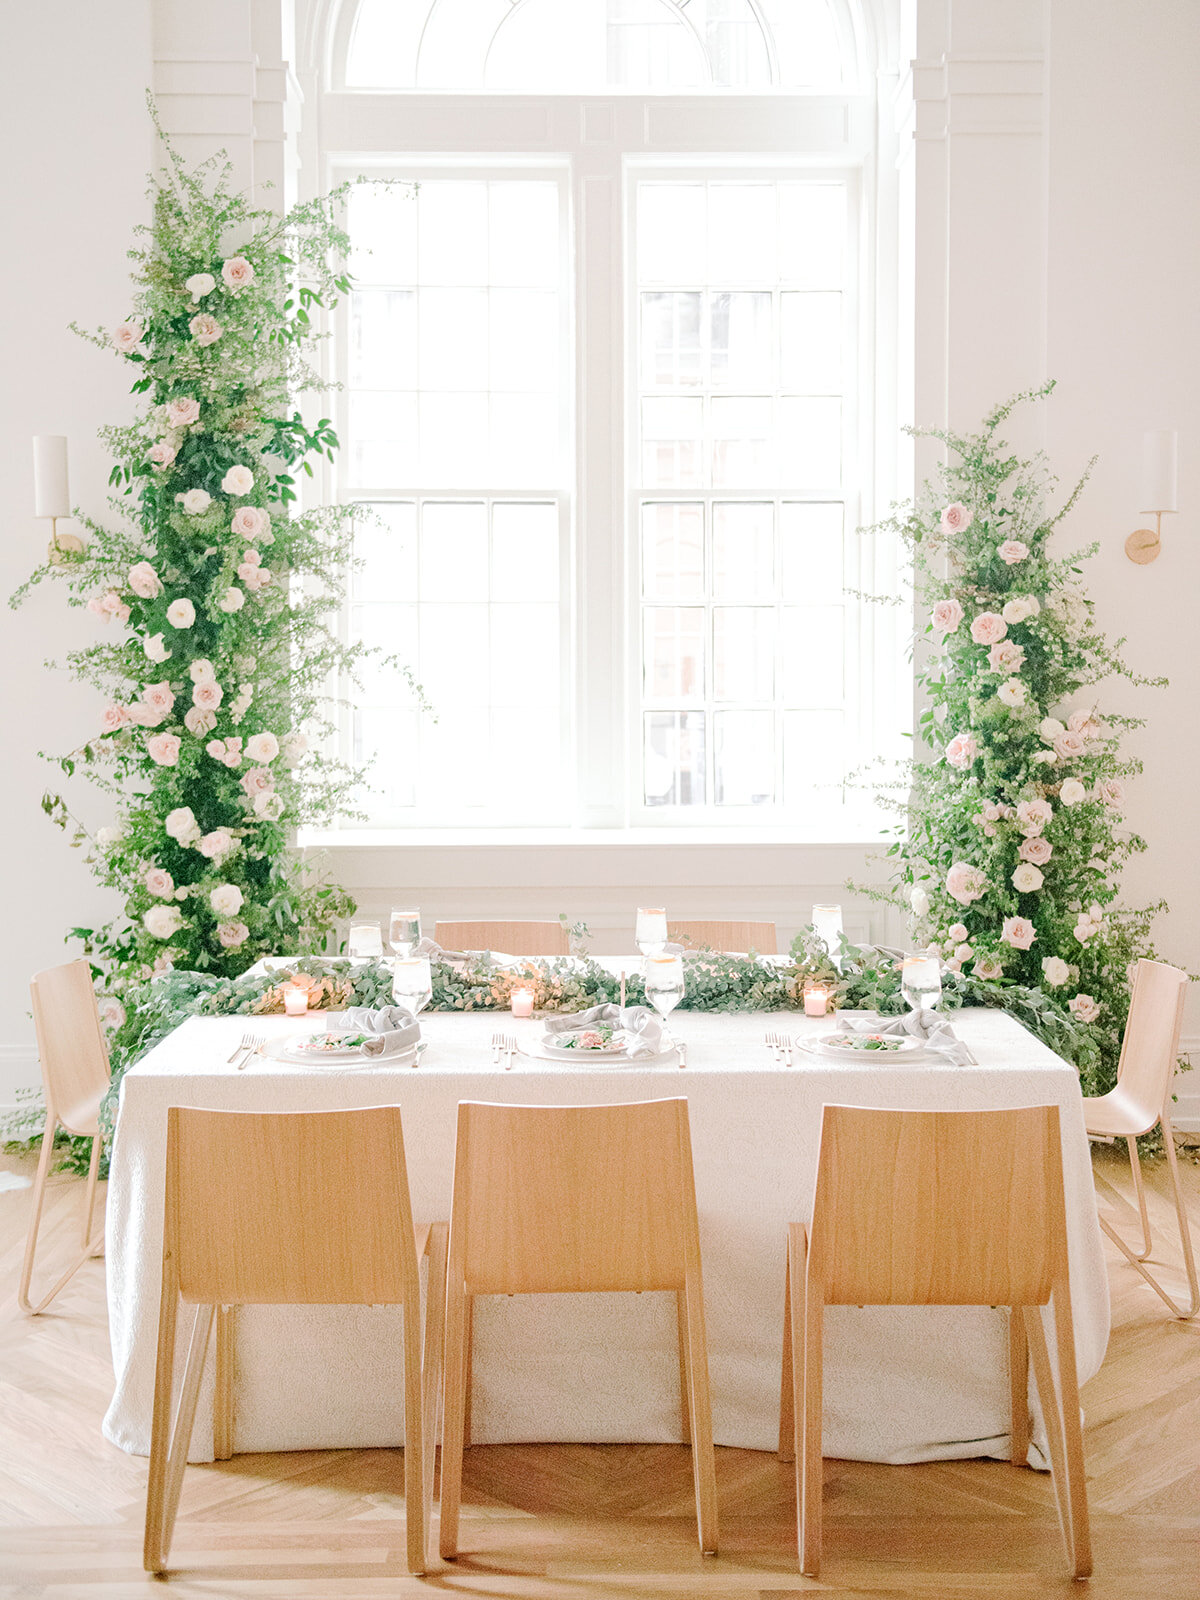 Sweetheart table with asymmetrical floral installation growing up either side of the windows in the Noelle. Nashville Wedding Florist.